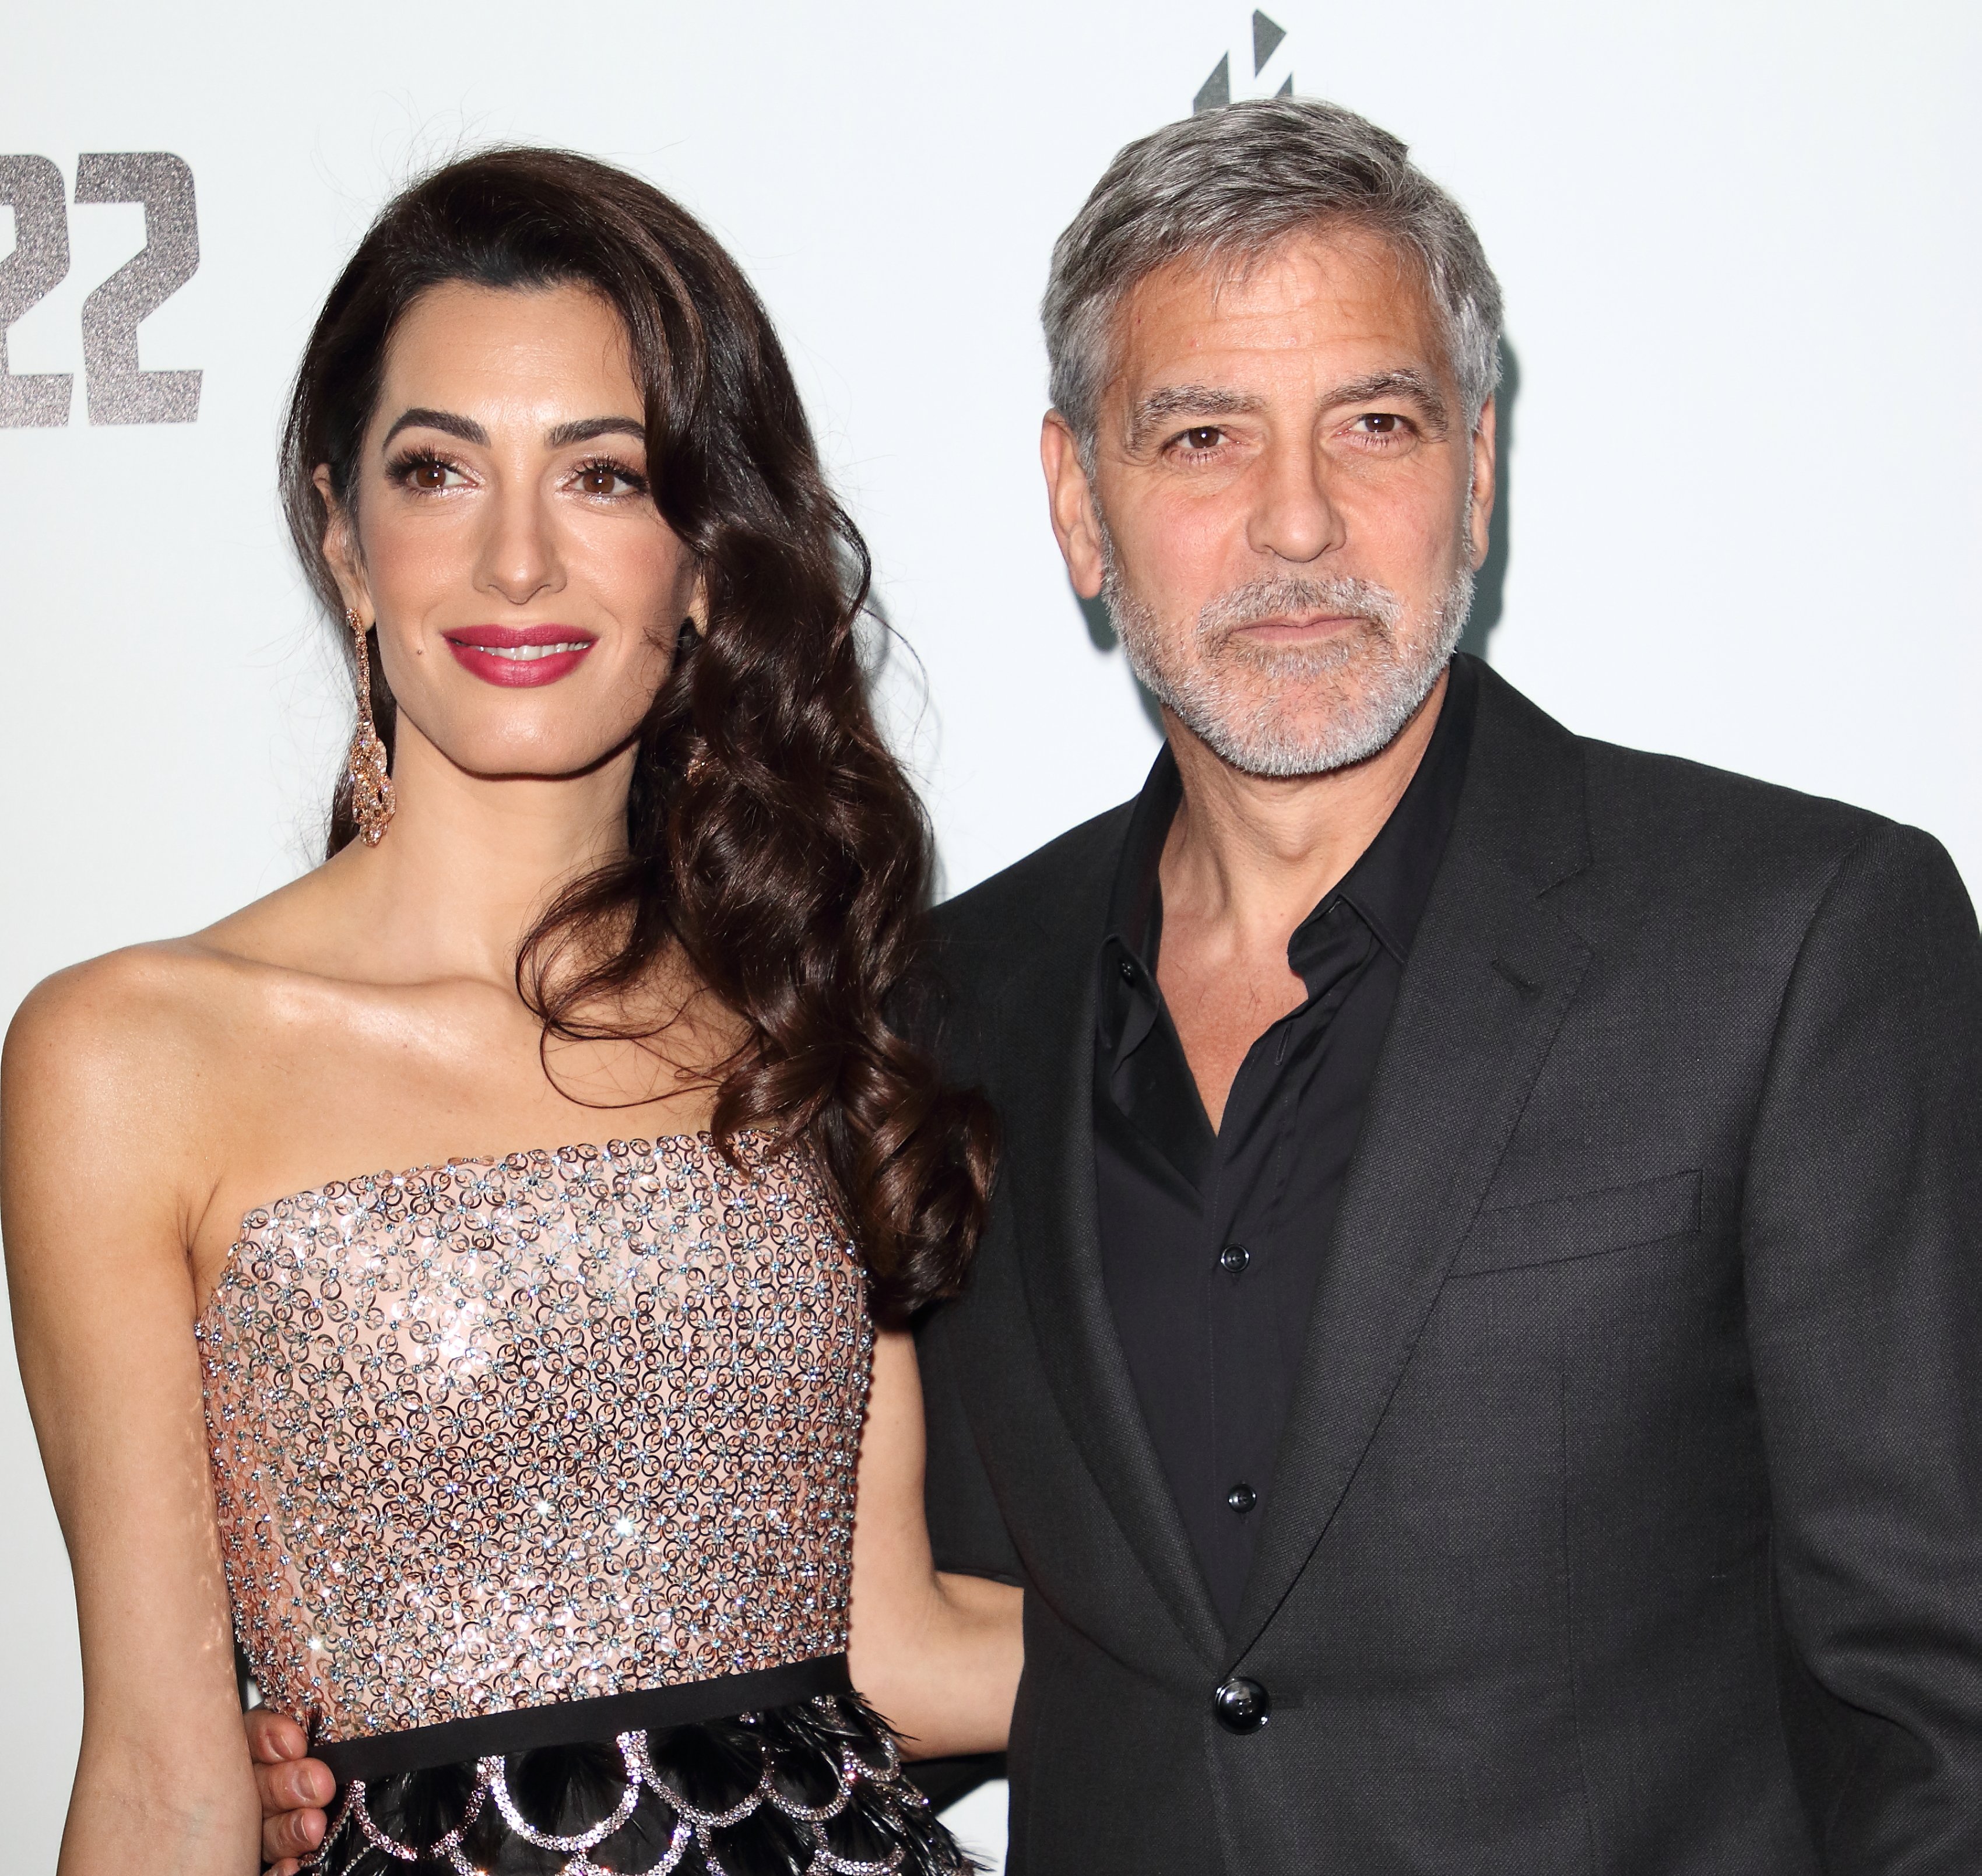  Amal Clooney and George Clooney attending the Catch 22 - TV Series premiere at the Vue Westfield, Westfield Shopping Centre in Shepherds Bush. / Source: Getty Images